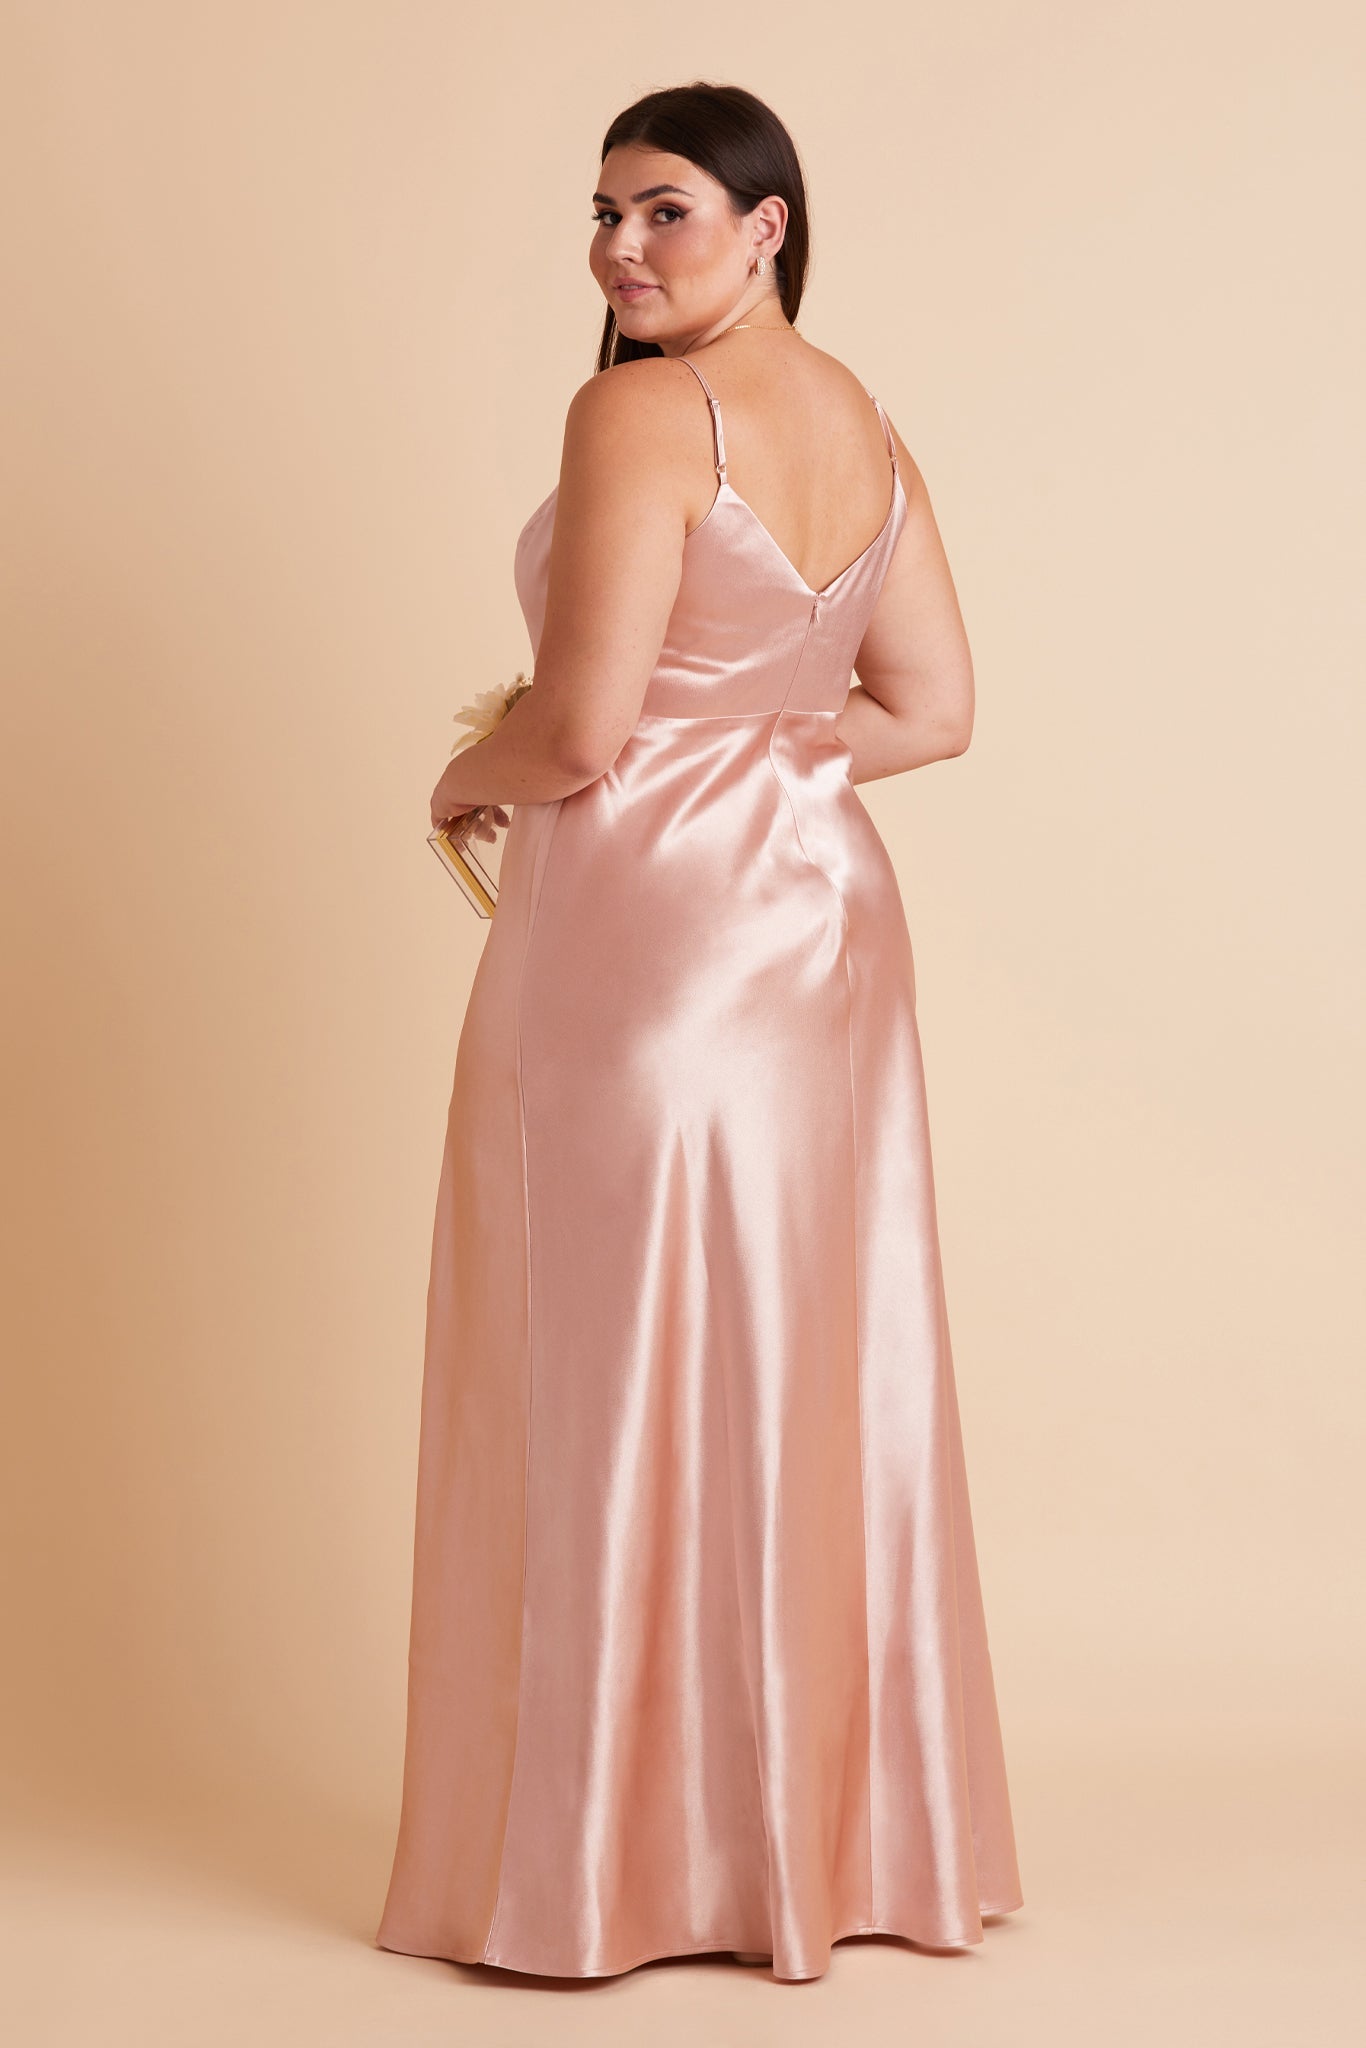 Jay plus size bridesmaid dress with slit in rose gold satin by Birdy Grey, back view